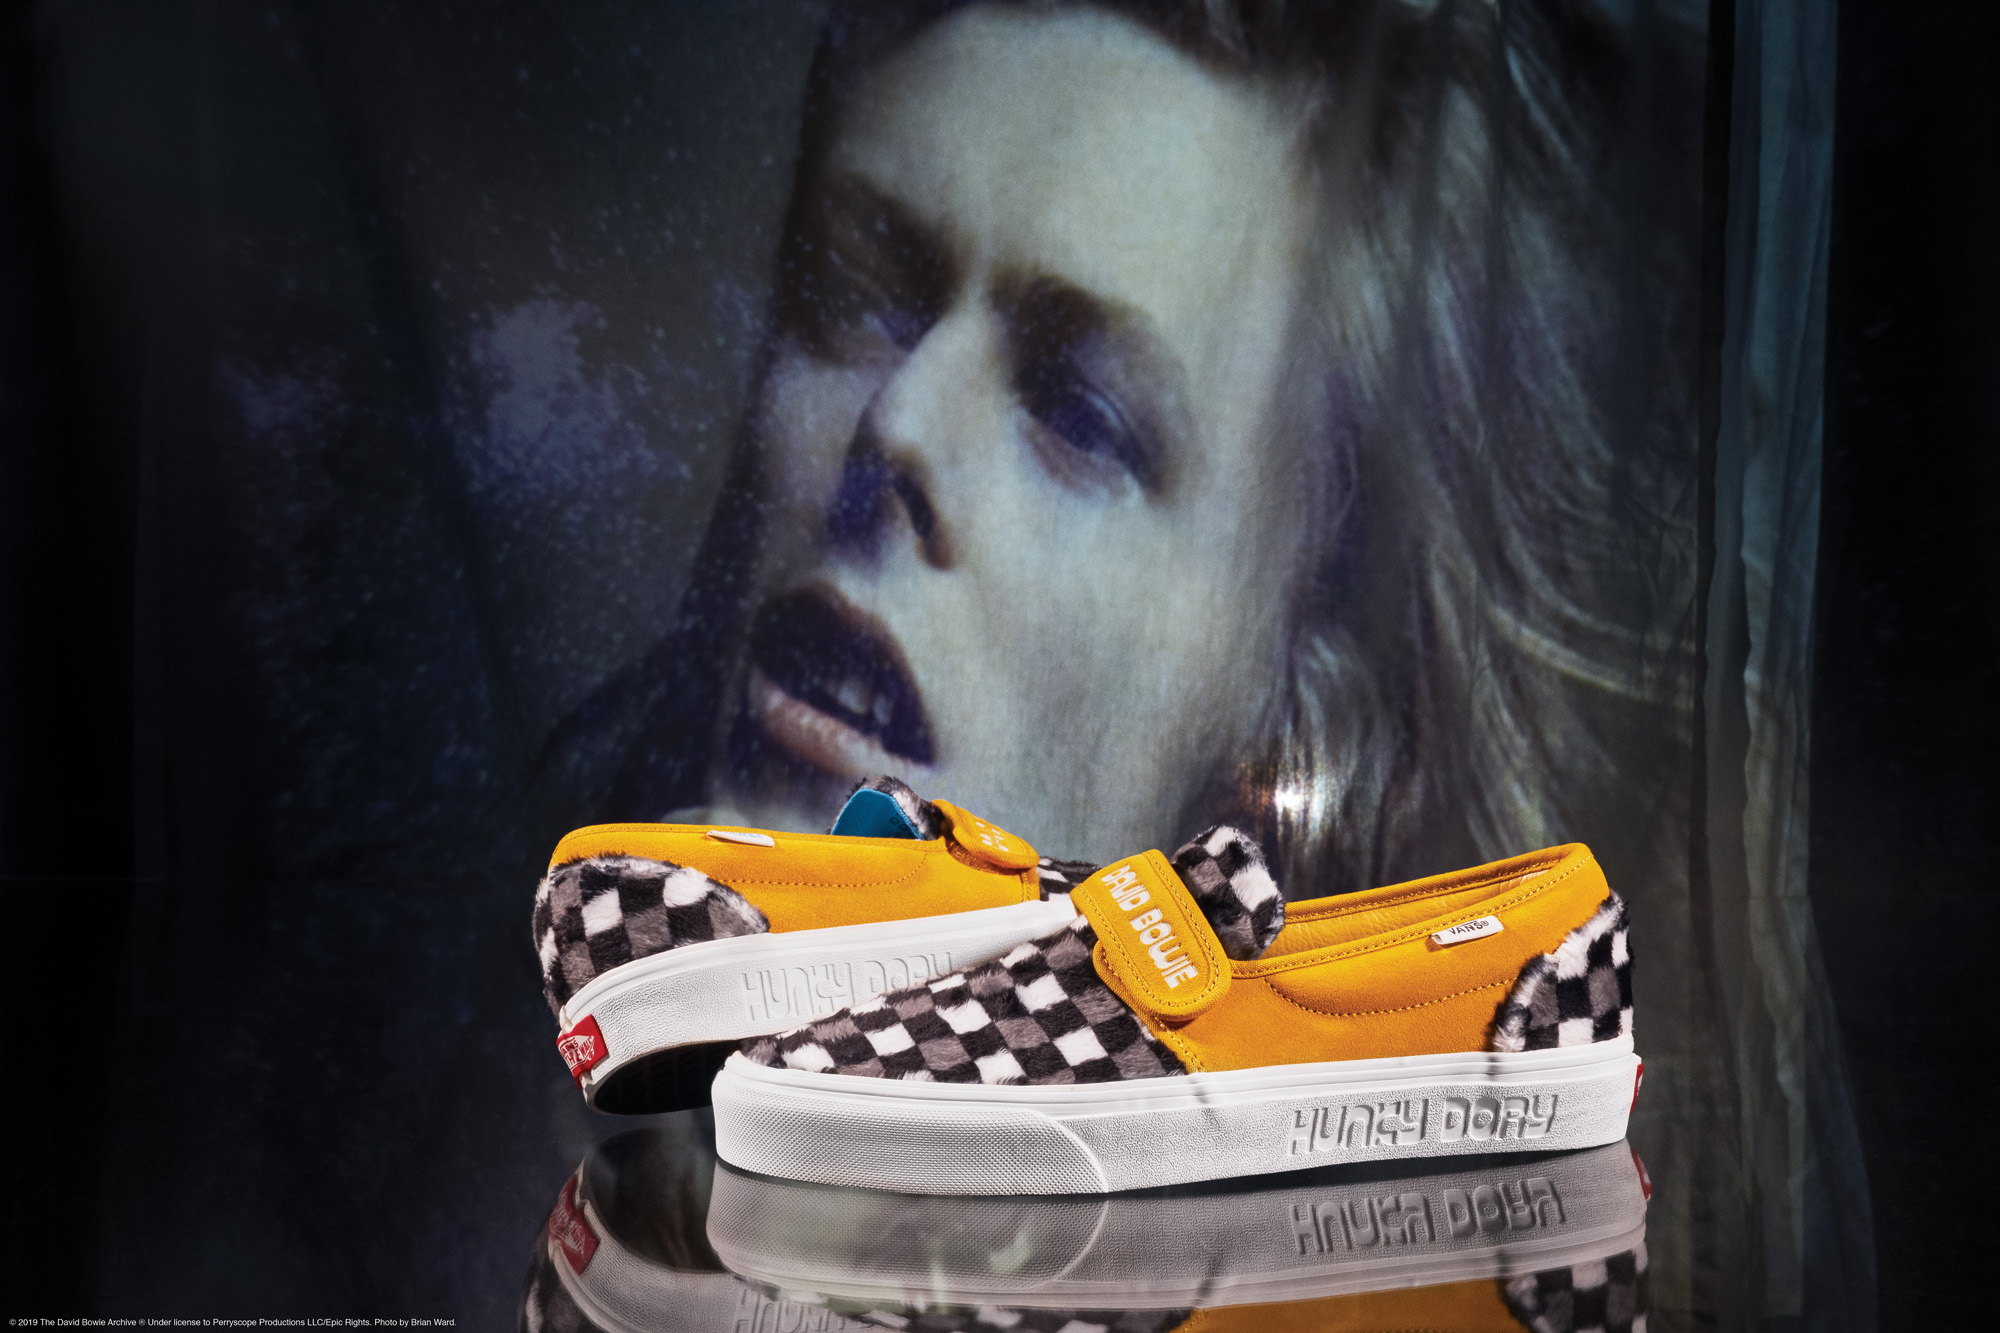 vans david bowie hunky dory